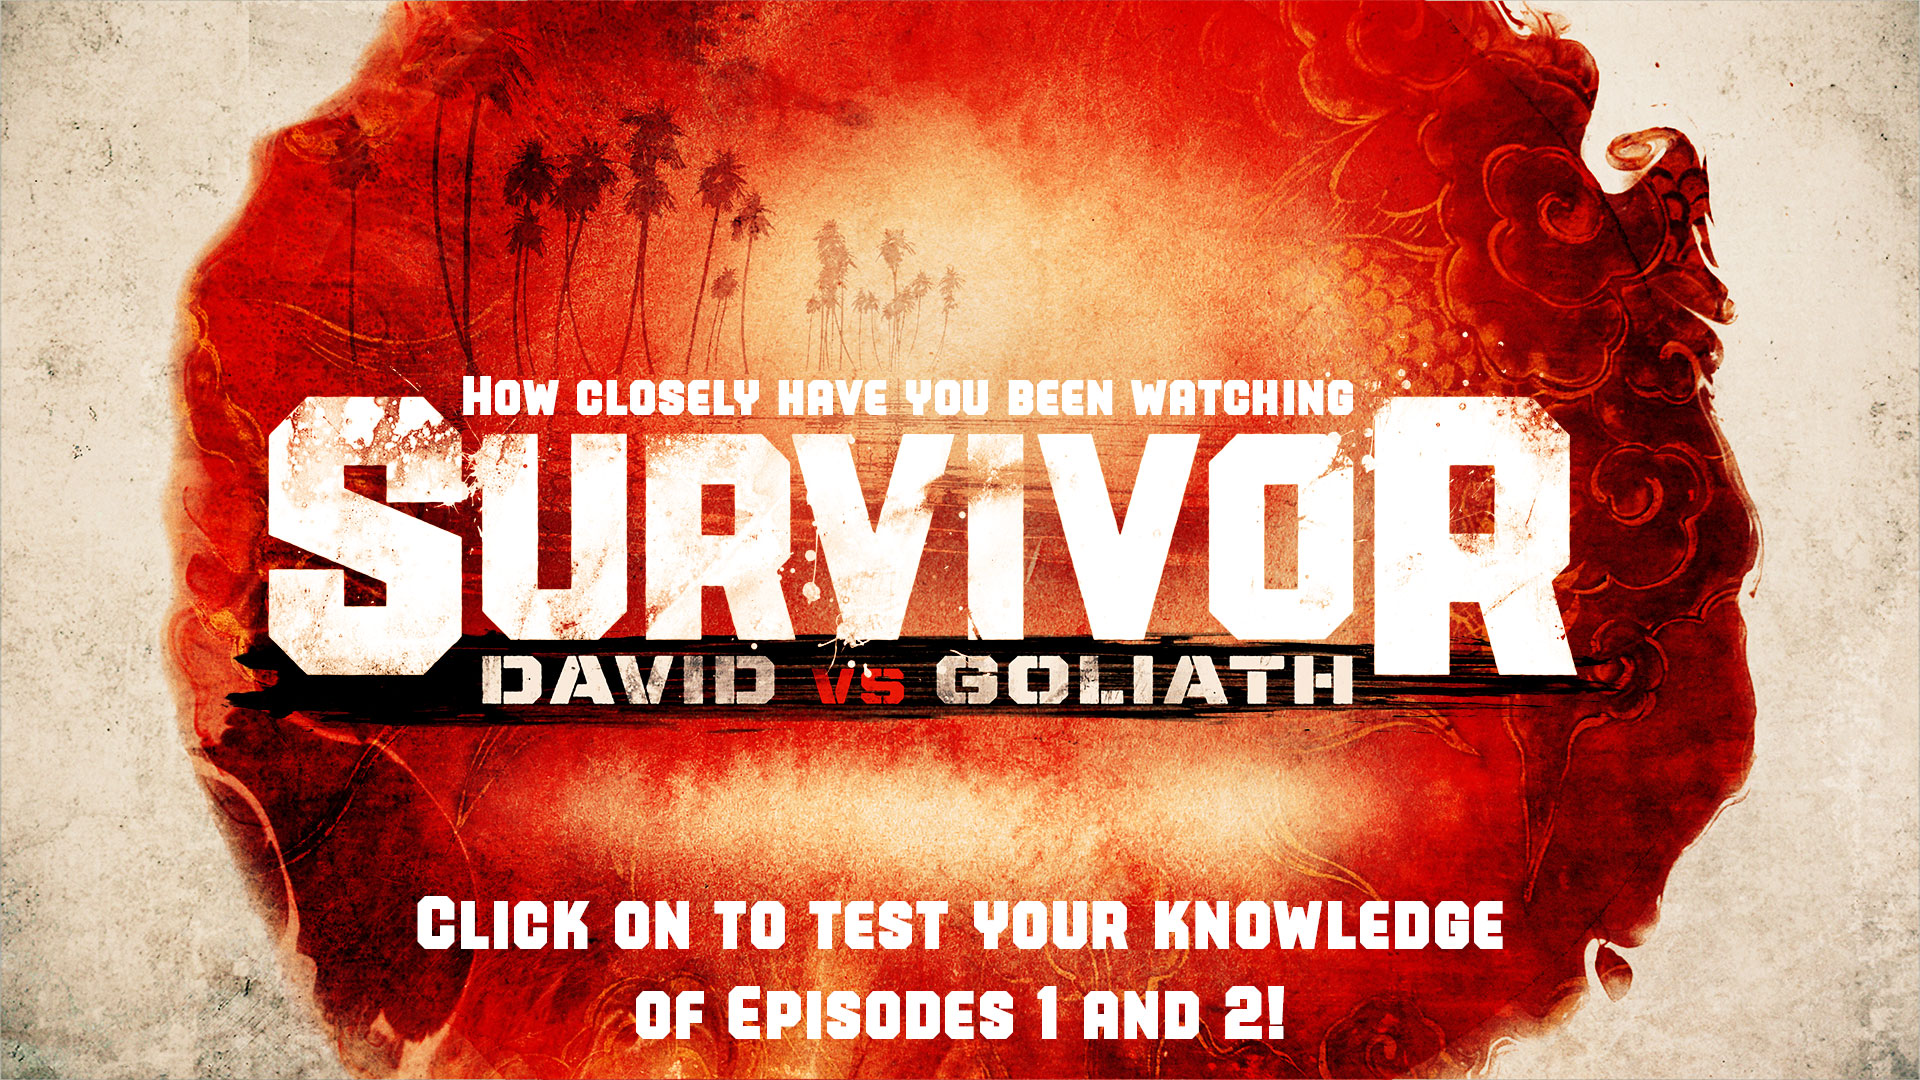 How closely are you watching Survivor: David vs. Goliath?